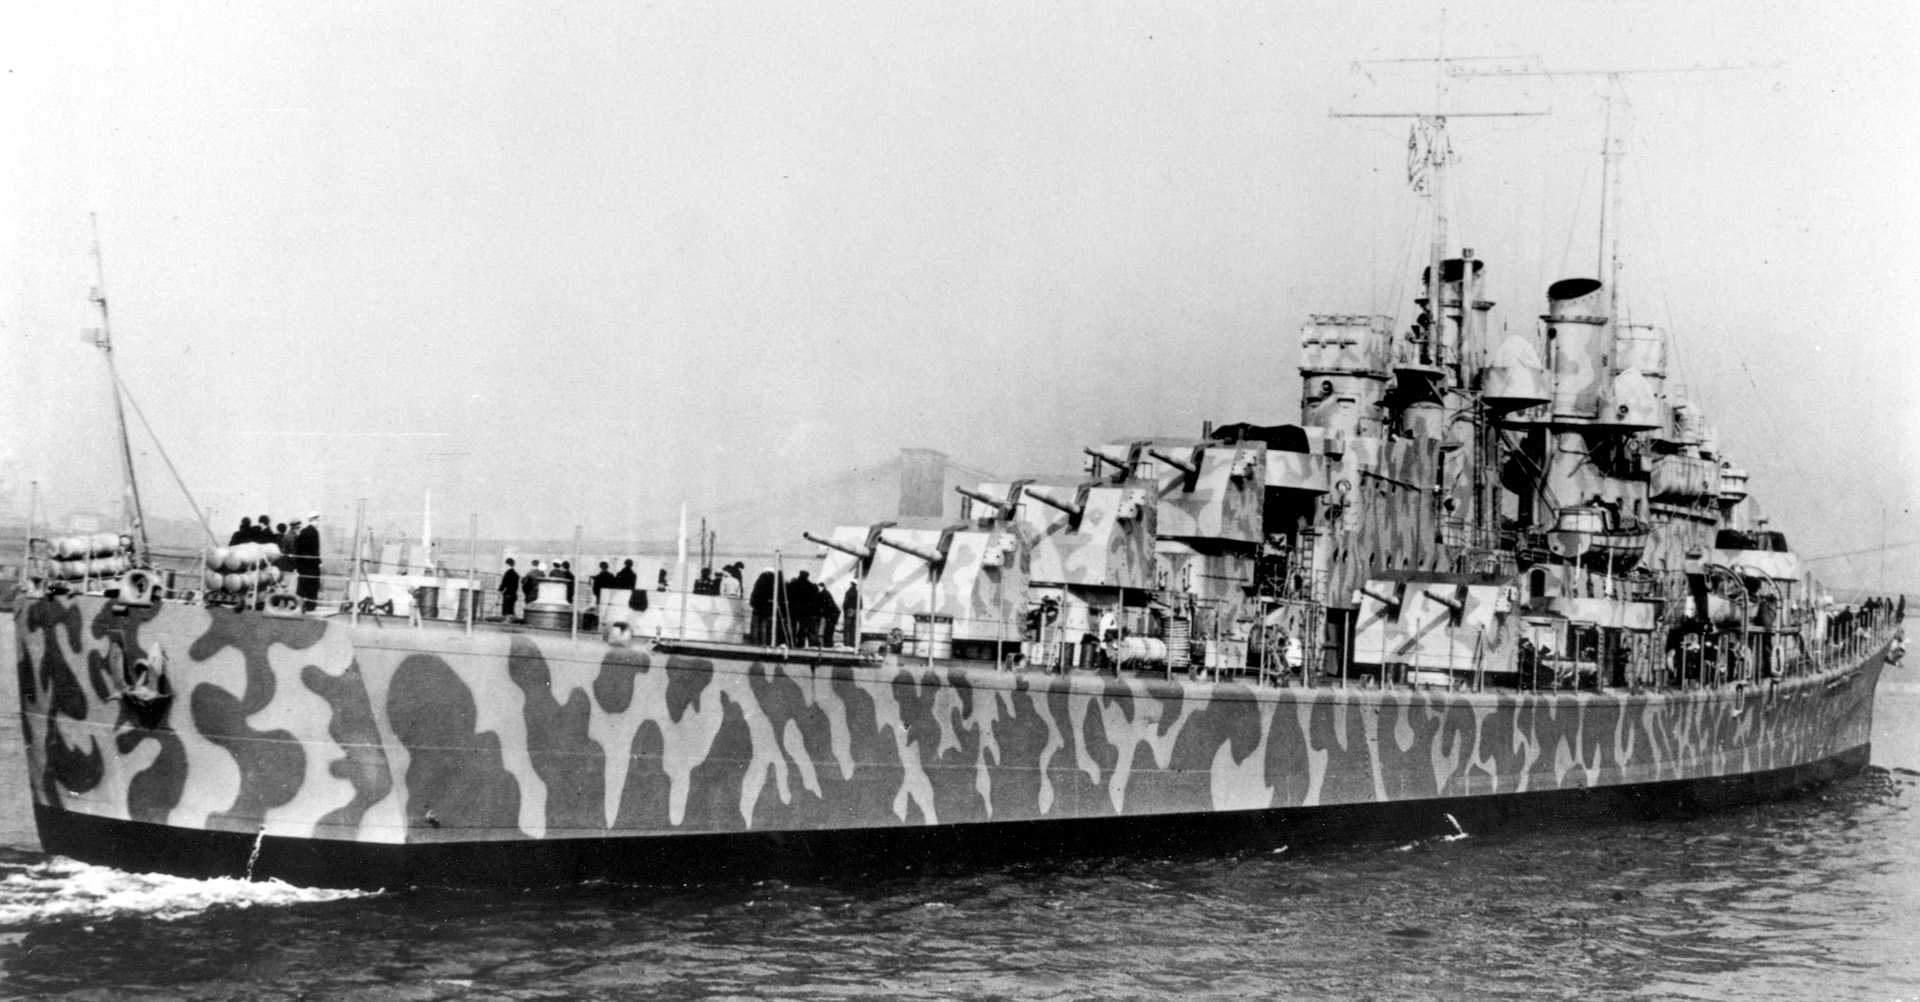 USSJuneau, painted with camouflage, in the safety of New York harbor.